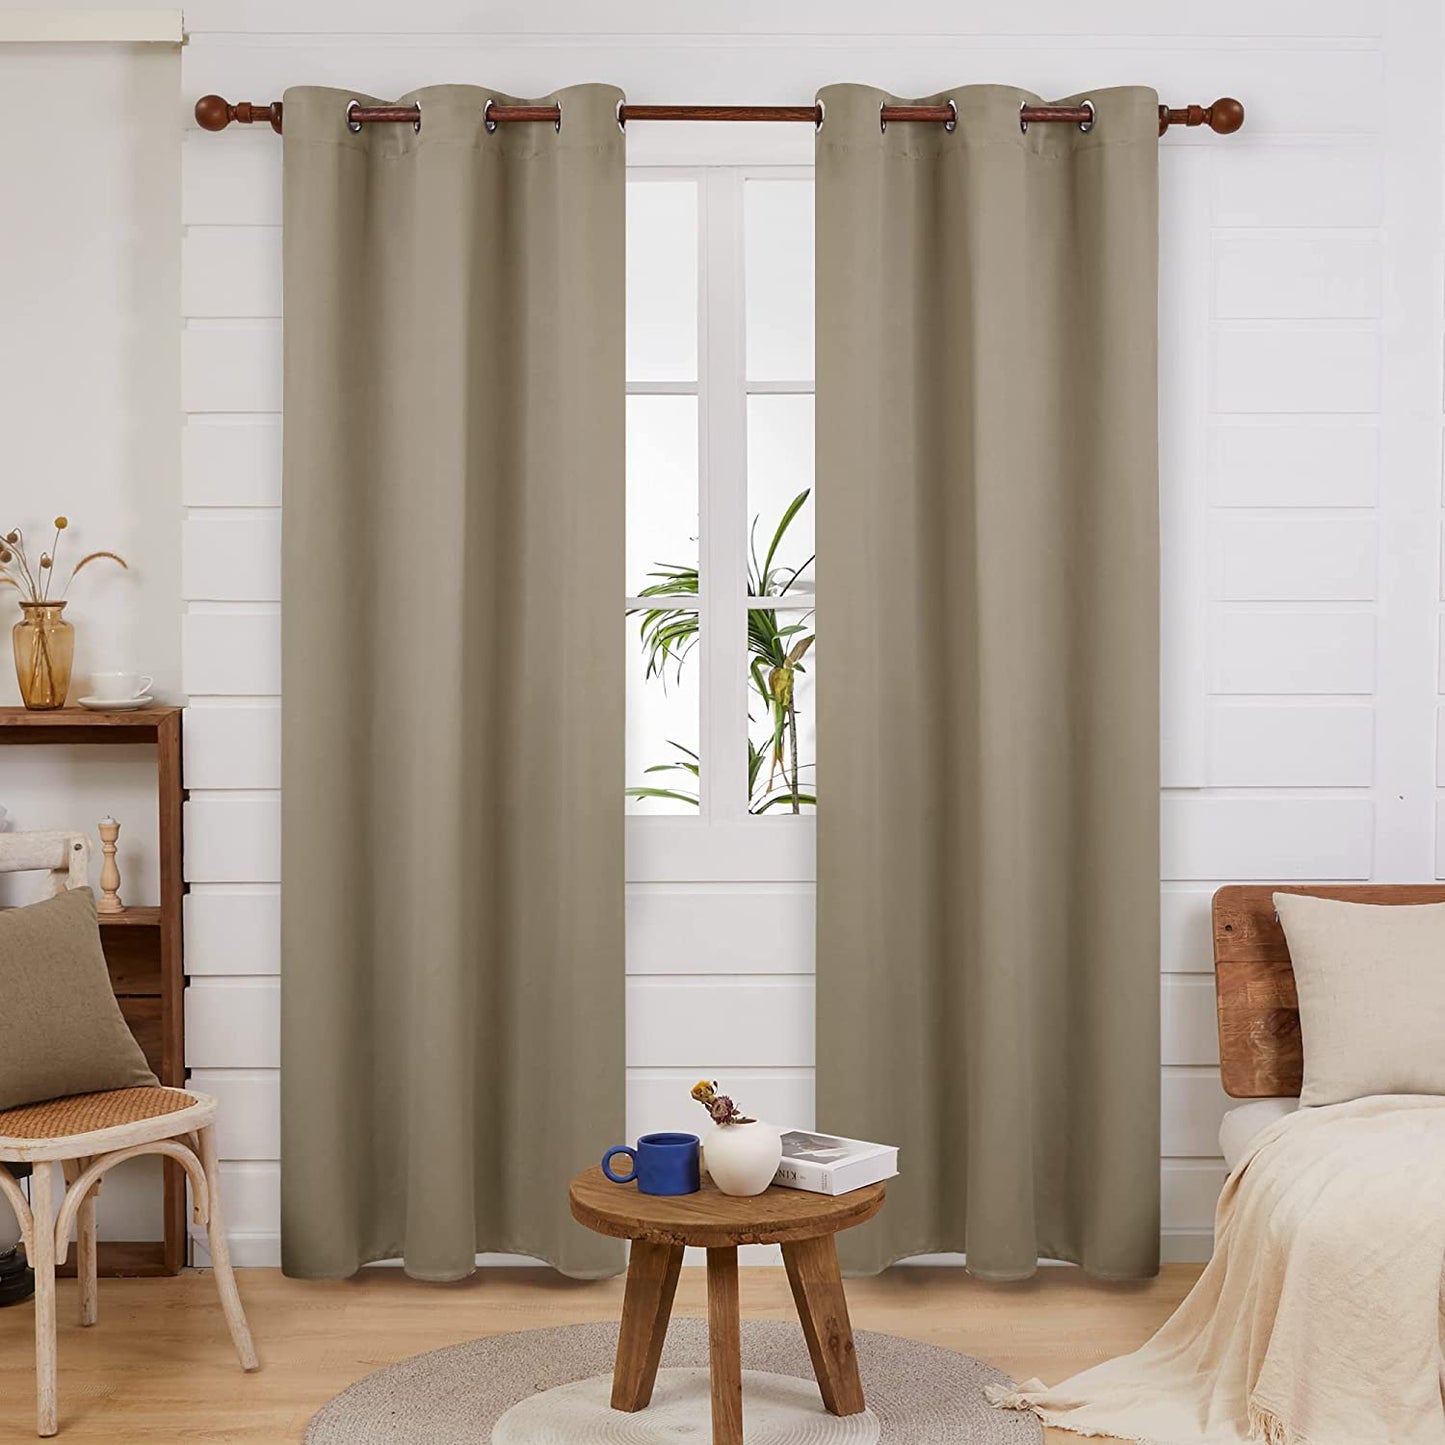 Deconovo 100% Blackout Curtains Room Darkening Thermal Insulated Blackout Grommet Window Curtain for Living Room,Black,42X120-Inch,1 Panel  Deconovo Khaki 42X120 Inch 